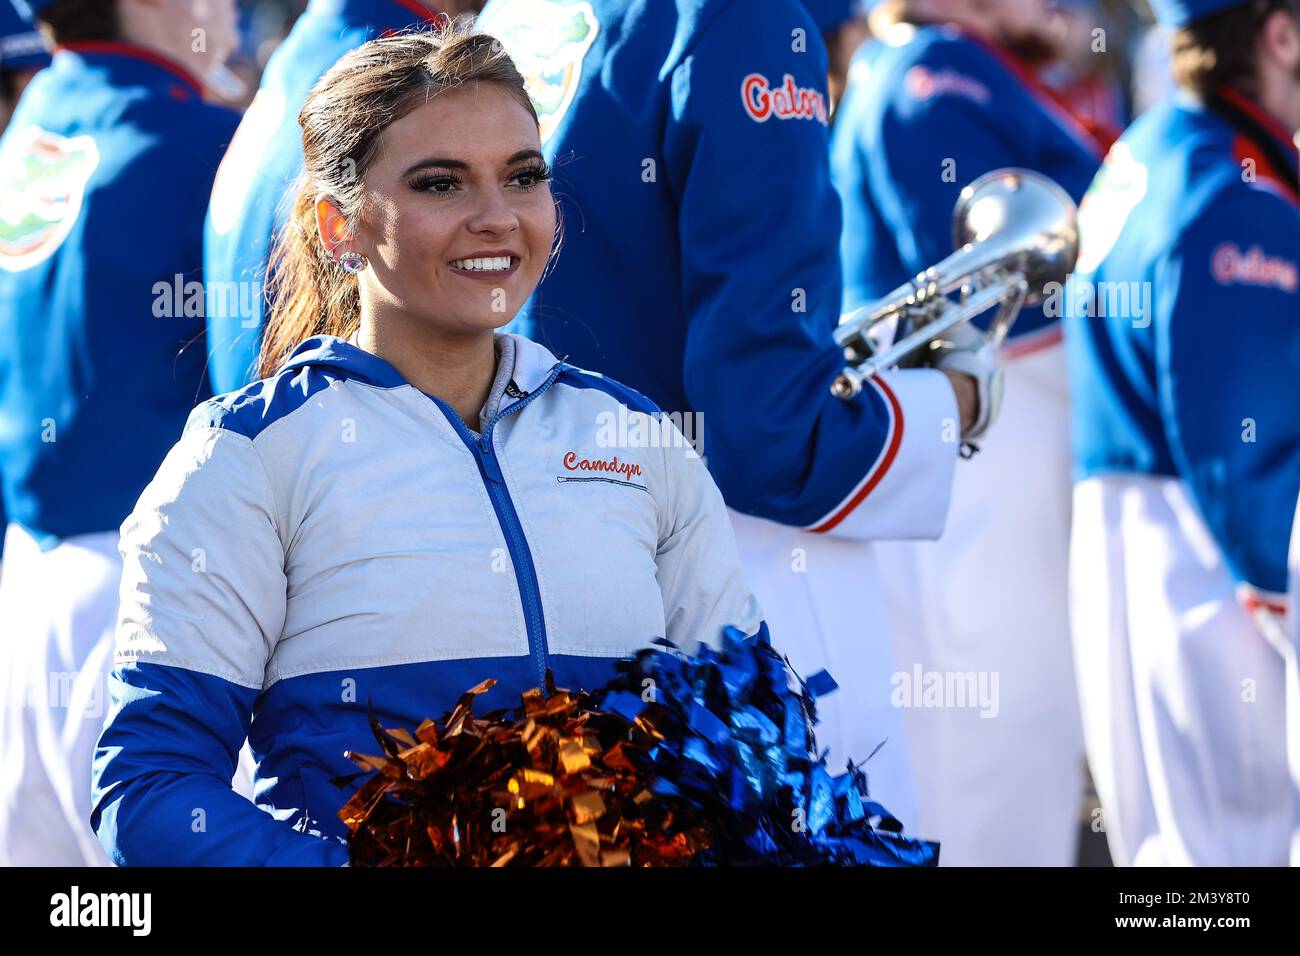 Las Vegas, NV, USA. 17th Dec, 2022. A Florida Gators cheerleader performs inside the Corona Extra Pregame Fan Fest prior to the start of the SRS Distribution Las Vegas Bowl featuring the Florida Gators and the Oregon State Beavers at Allegiant Stadium in Las Vegas, NV. Christopher Trim/CSM/Alamy Live News Stock Photo